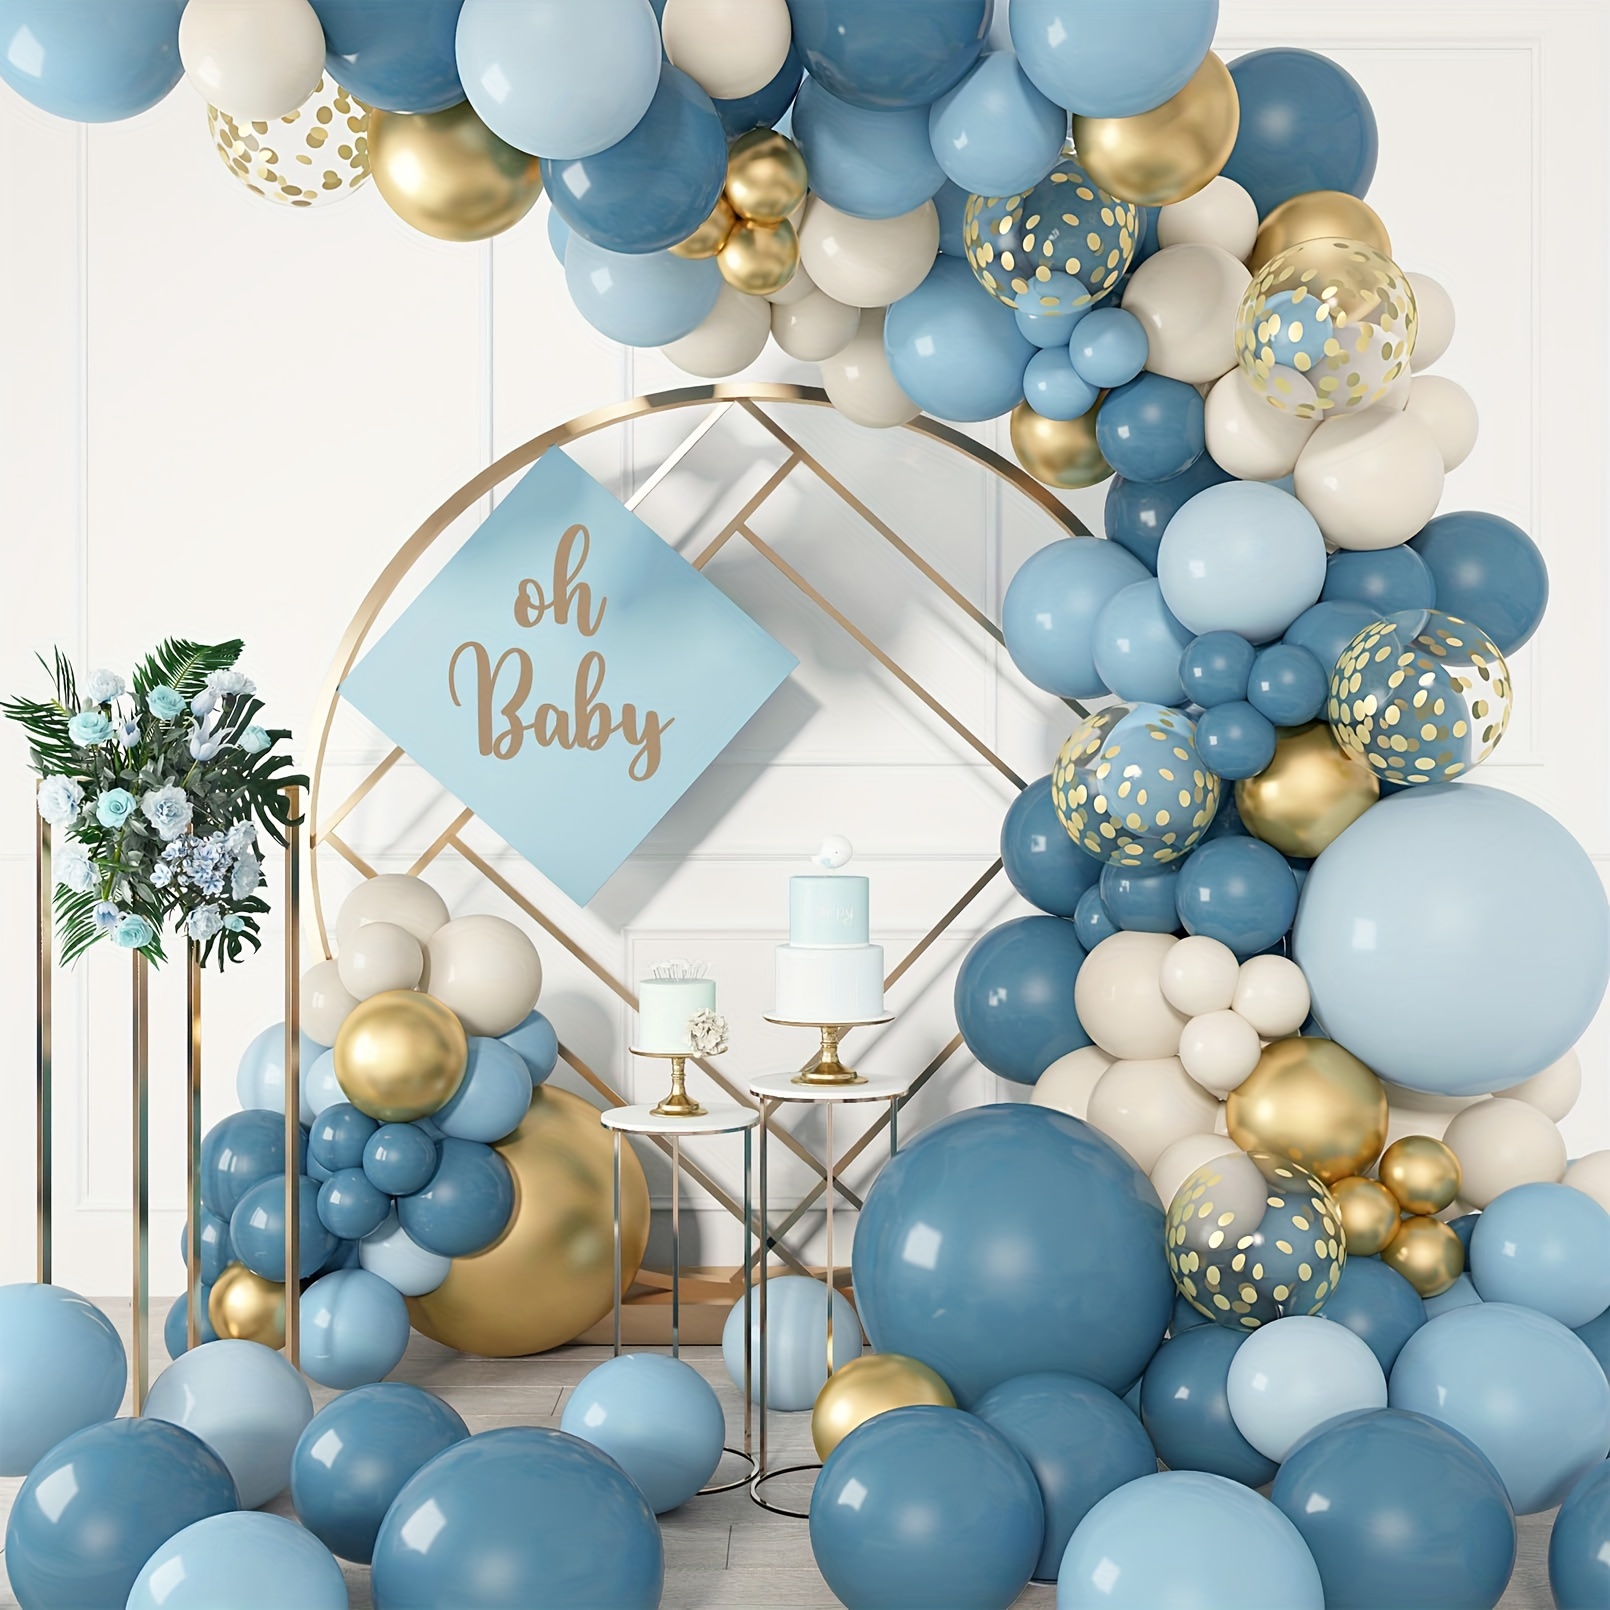 

170pcs Dusty Blue Balloons Arch Garland Kit, Baby Blue Gold White Ocean Macaroon Blue Confetti Balloons For Birthday Bridal Baby Shower Boy Gender Reveal Wedding Engagement Bachelor Party Decorations